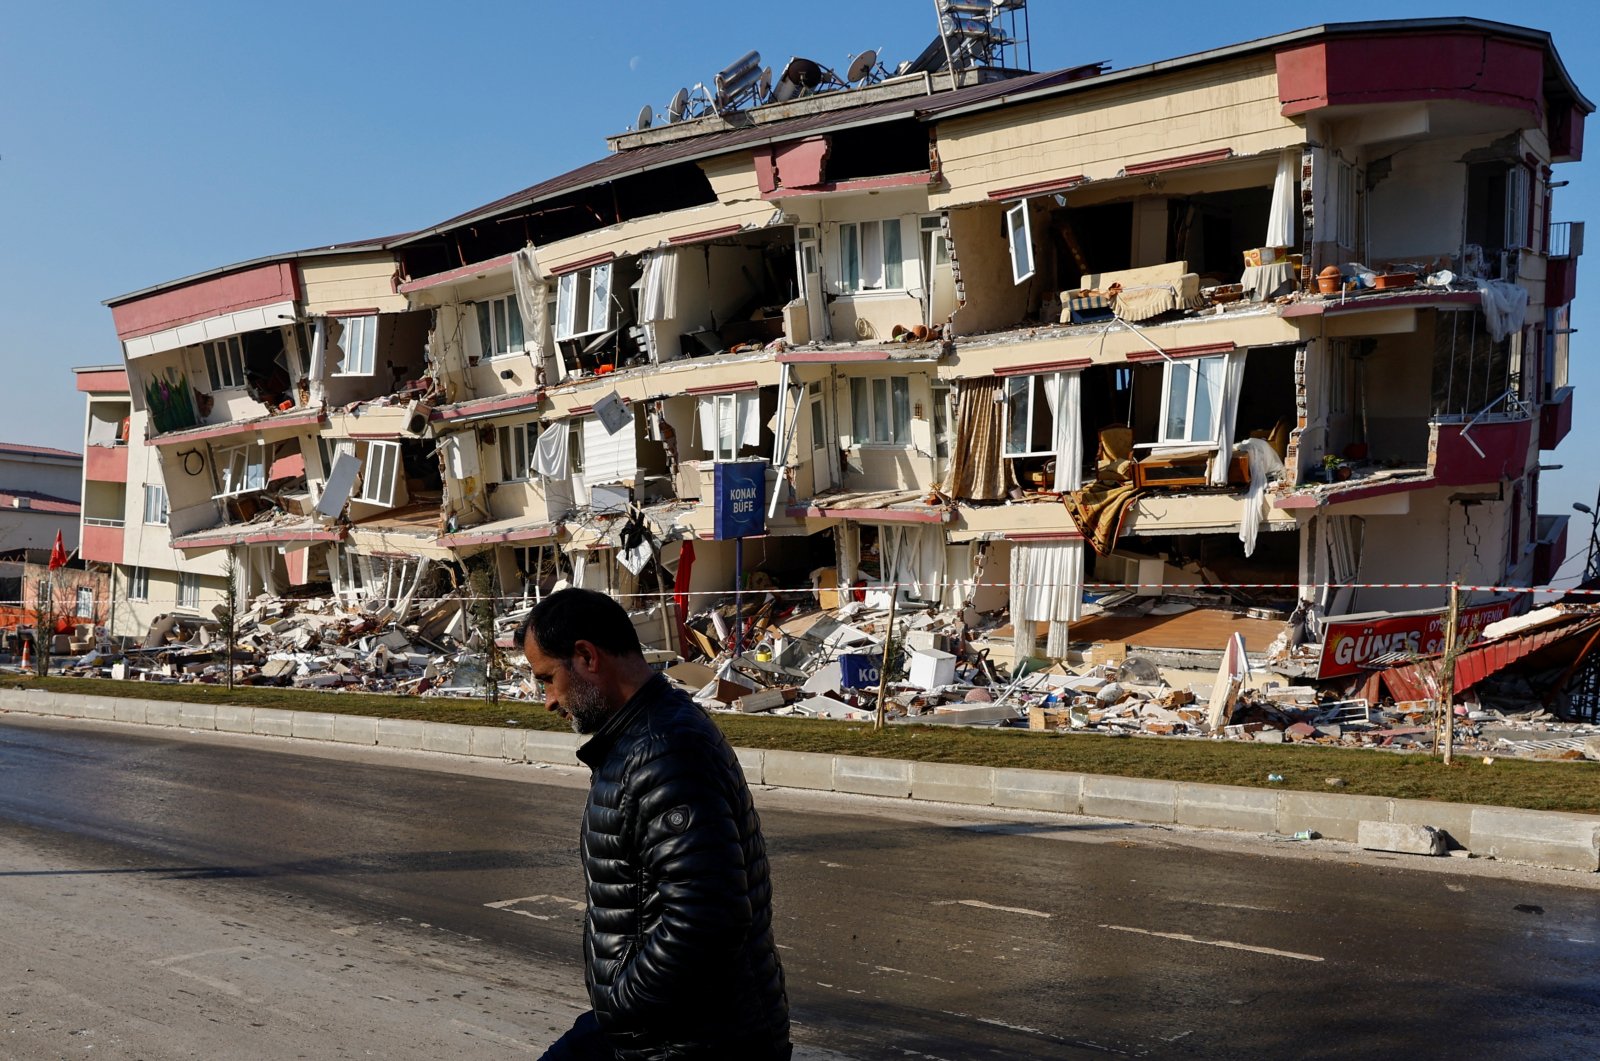 A man walks past a damaged building in the aftermath of a deadly earthquake in Kahramanmaraş, Türkiye, Feb. 13, 2023. (Reuters Photo)